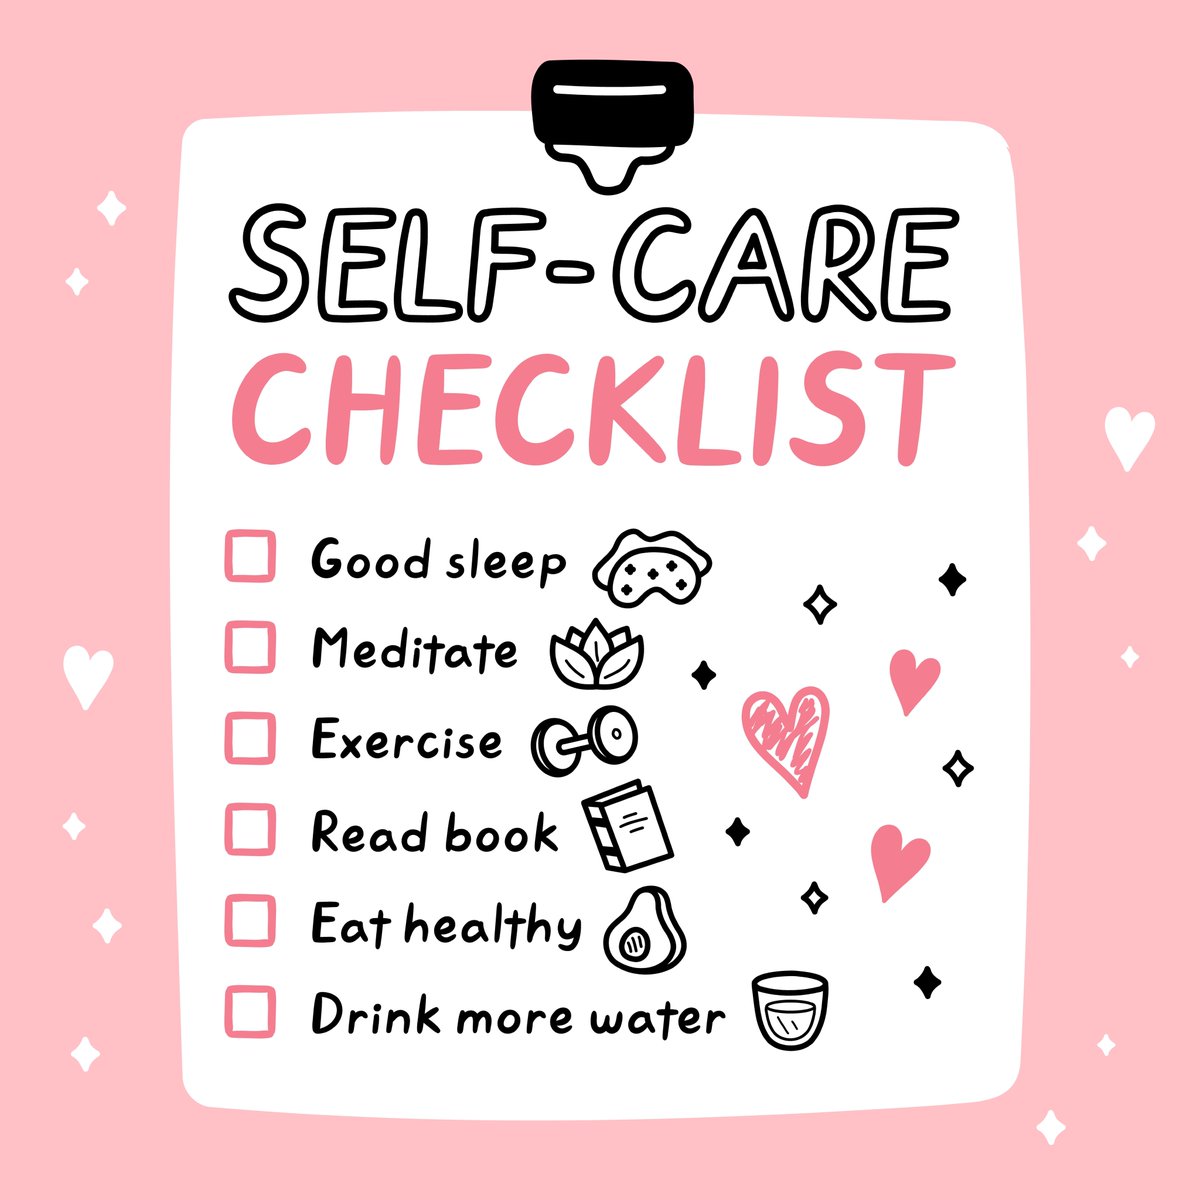 What's on your self-care checklist for today? 🌺

#WednesdayThoughts #WednesdayWisdom #selfcare #JoyTrain